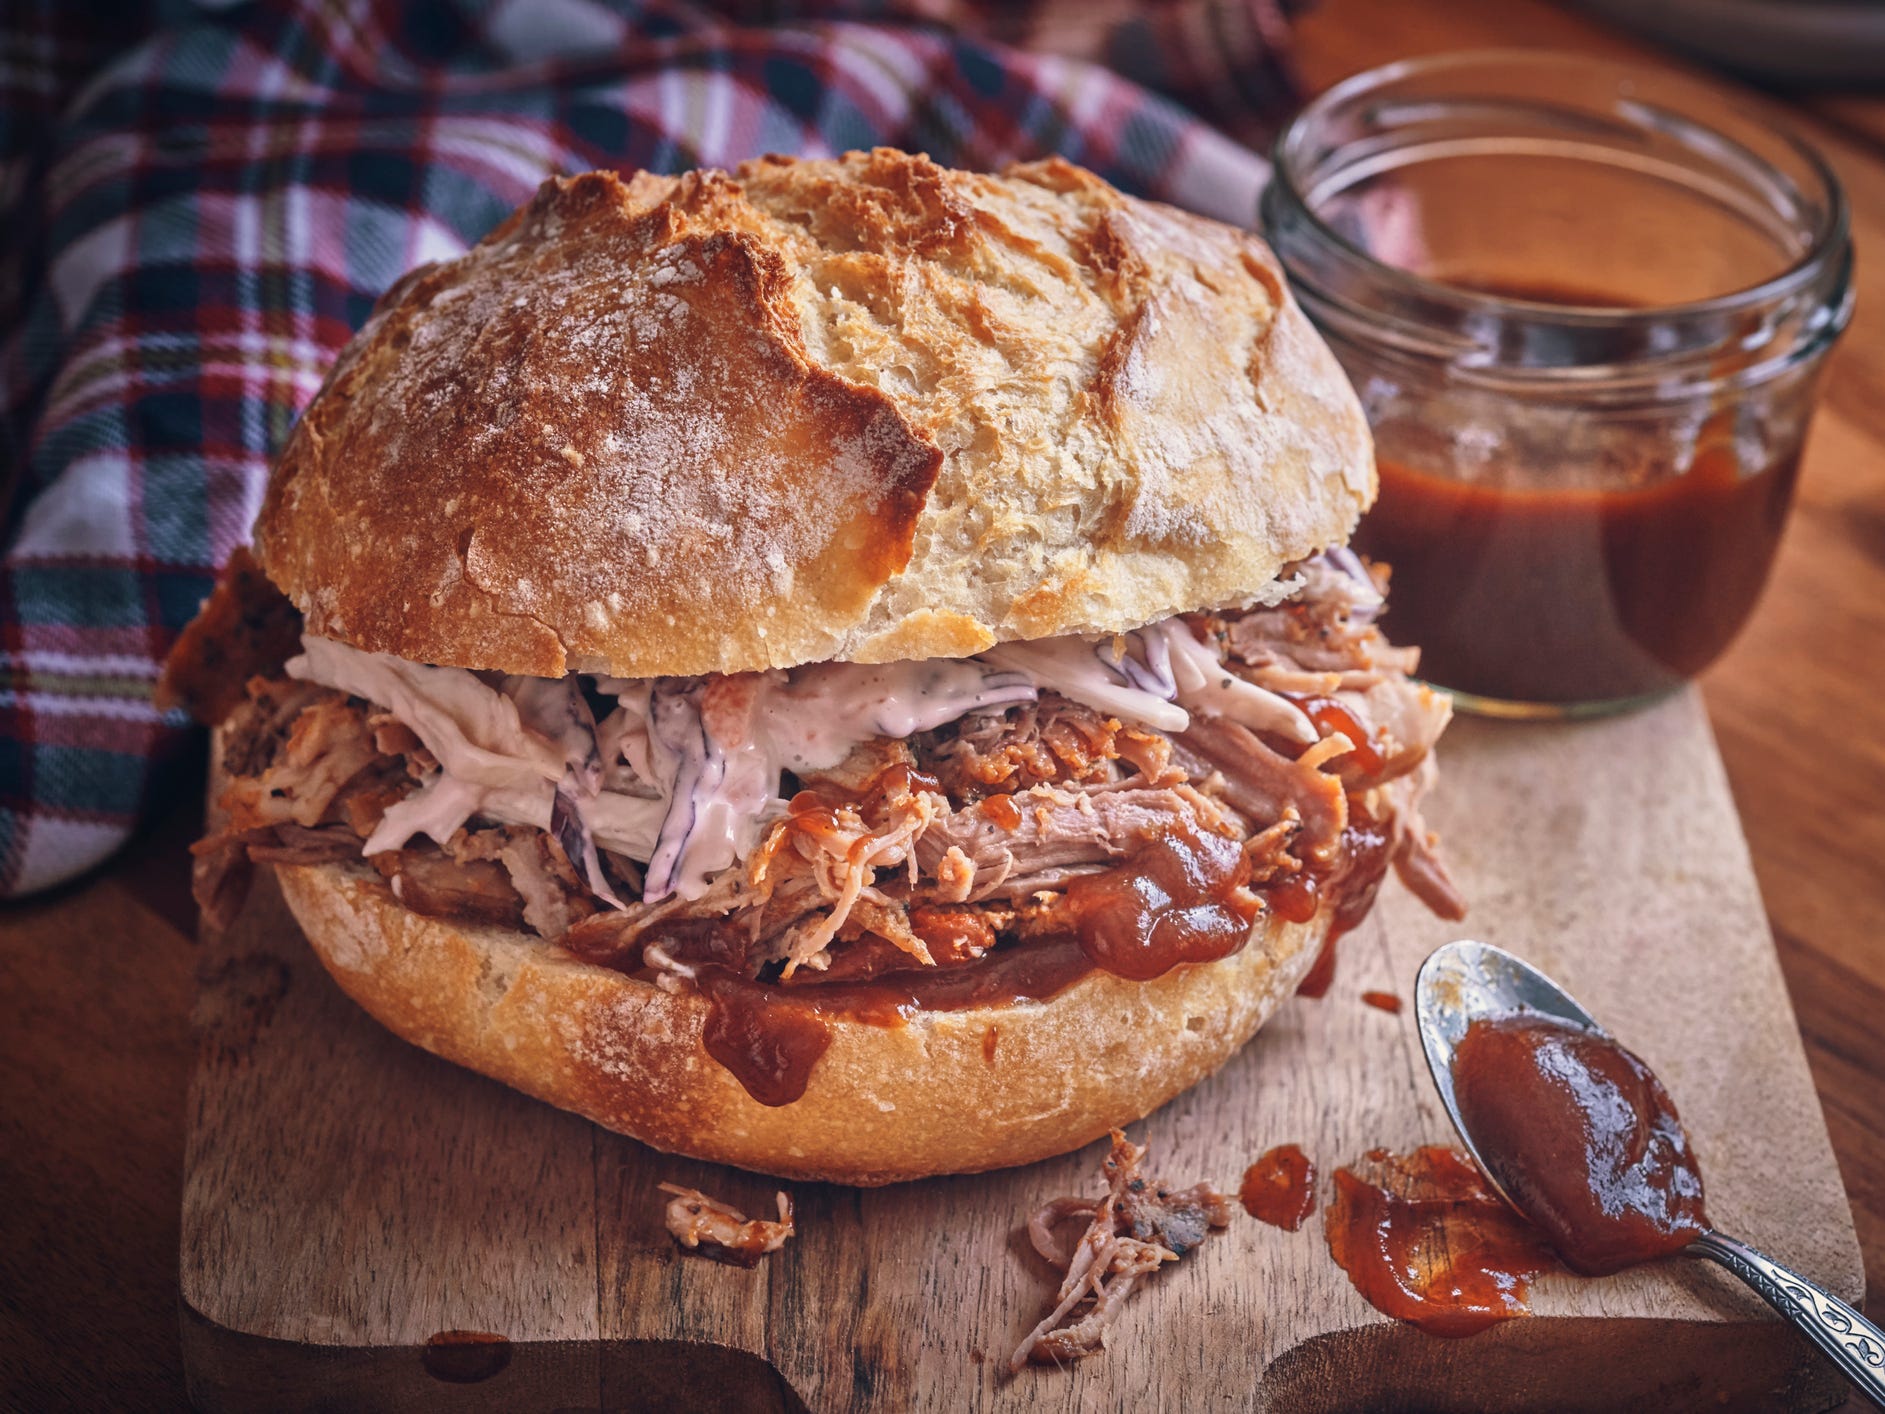 <p>Just like Hawaii, one of North Carolina's best sandwiches is pulled pork, but make sure to smother it in a tangy, vinegar-based BBQ sauce.</p>